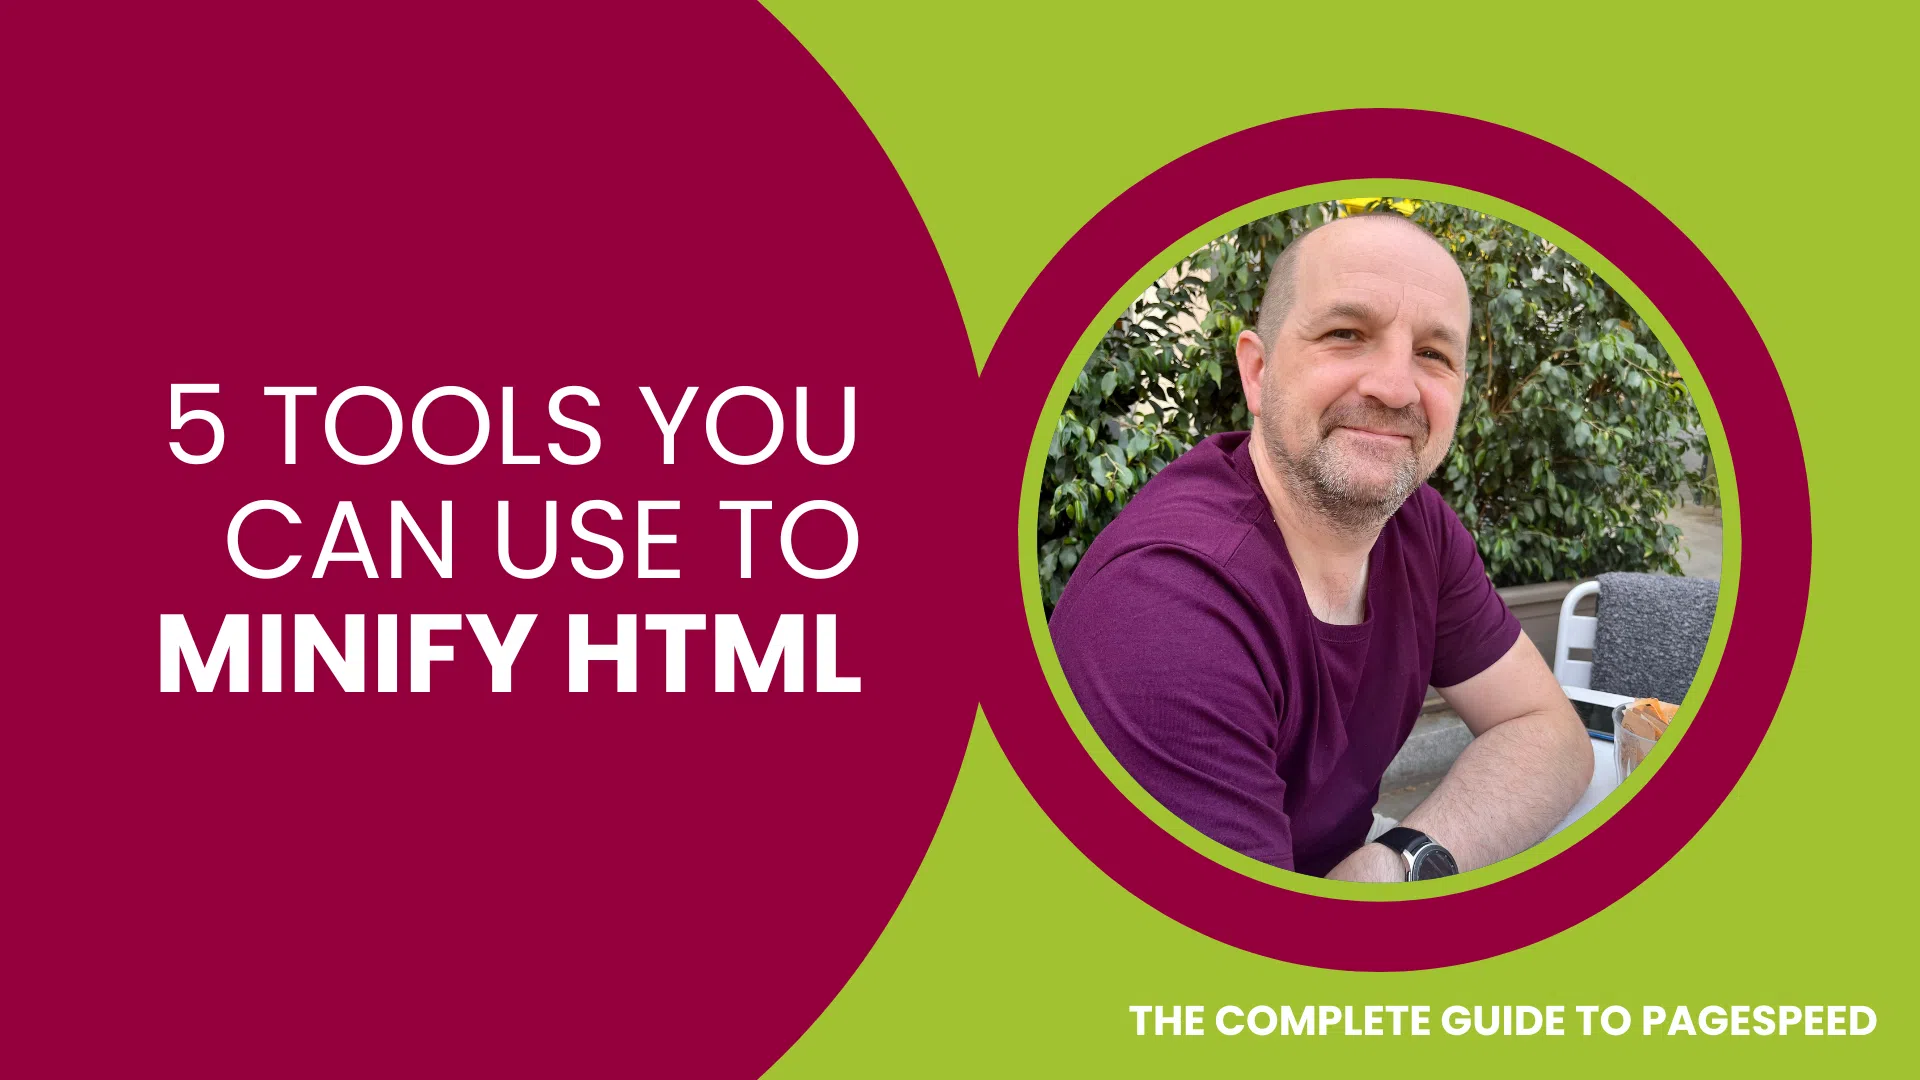 5 Tools You Can Use to Minify HTML